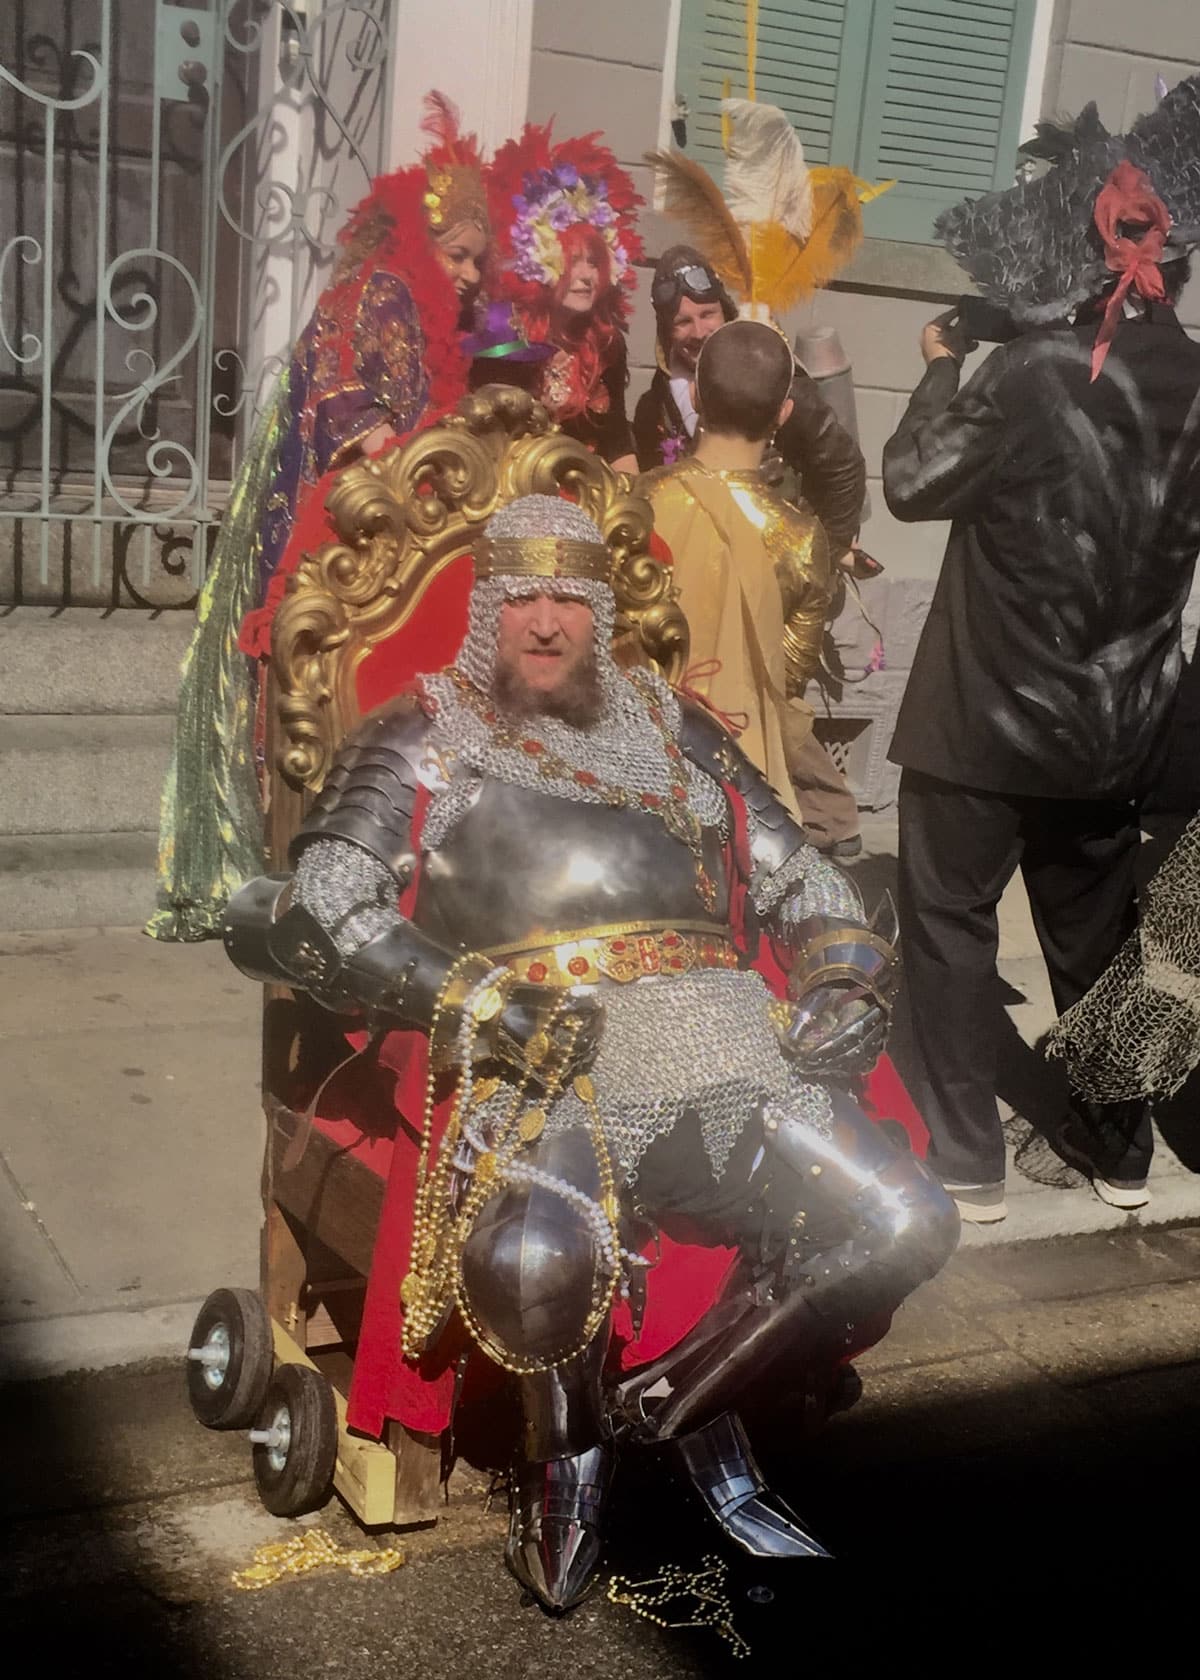 Masker as Knight on a thrown on Mardi Gras Day